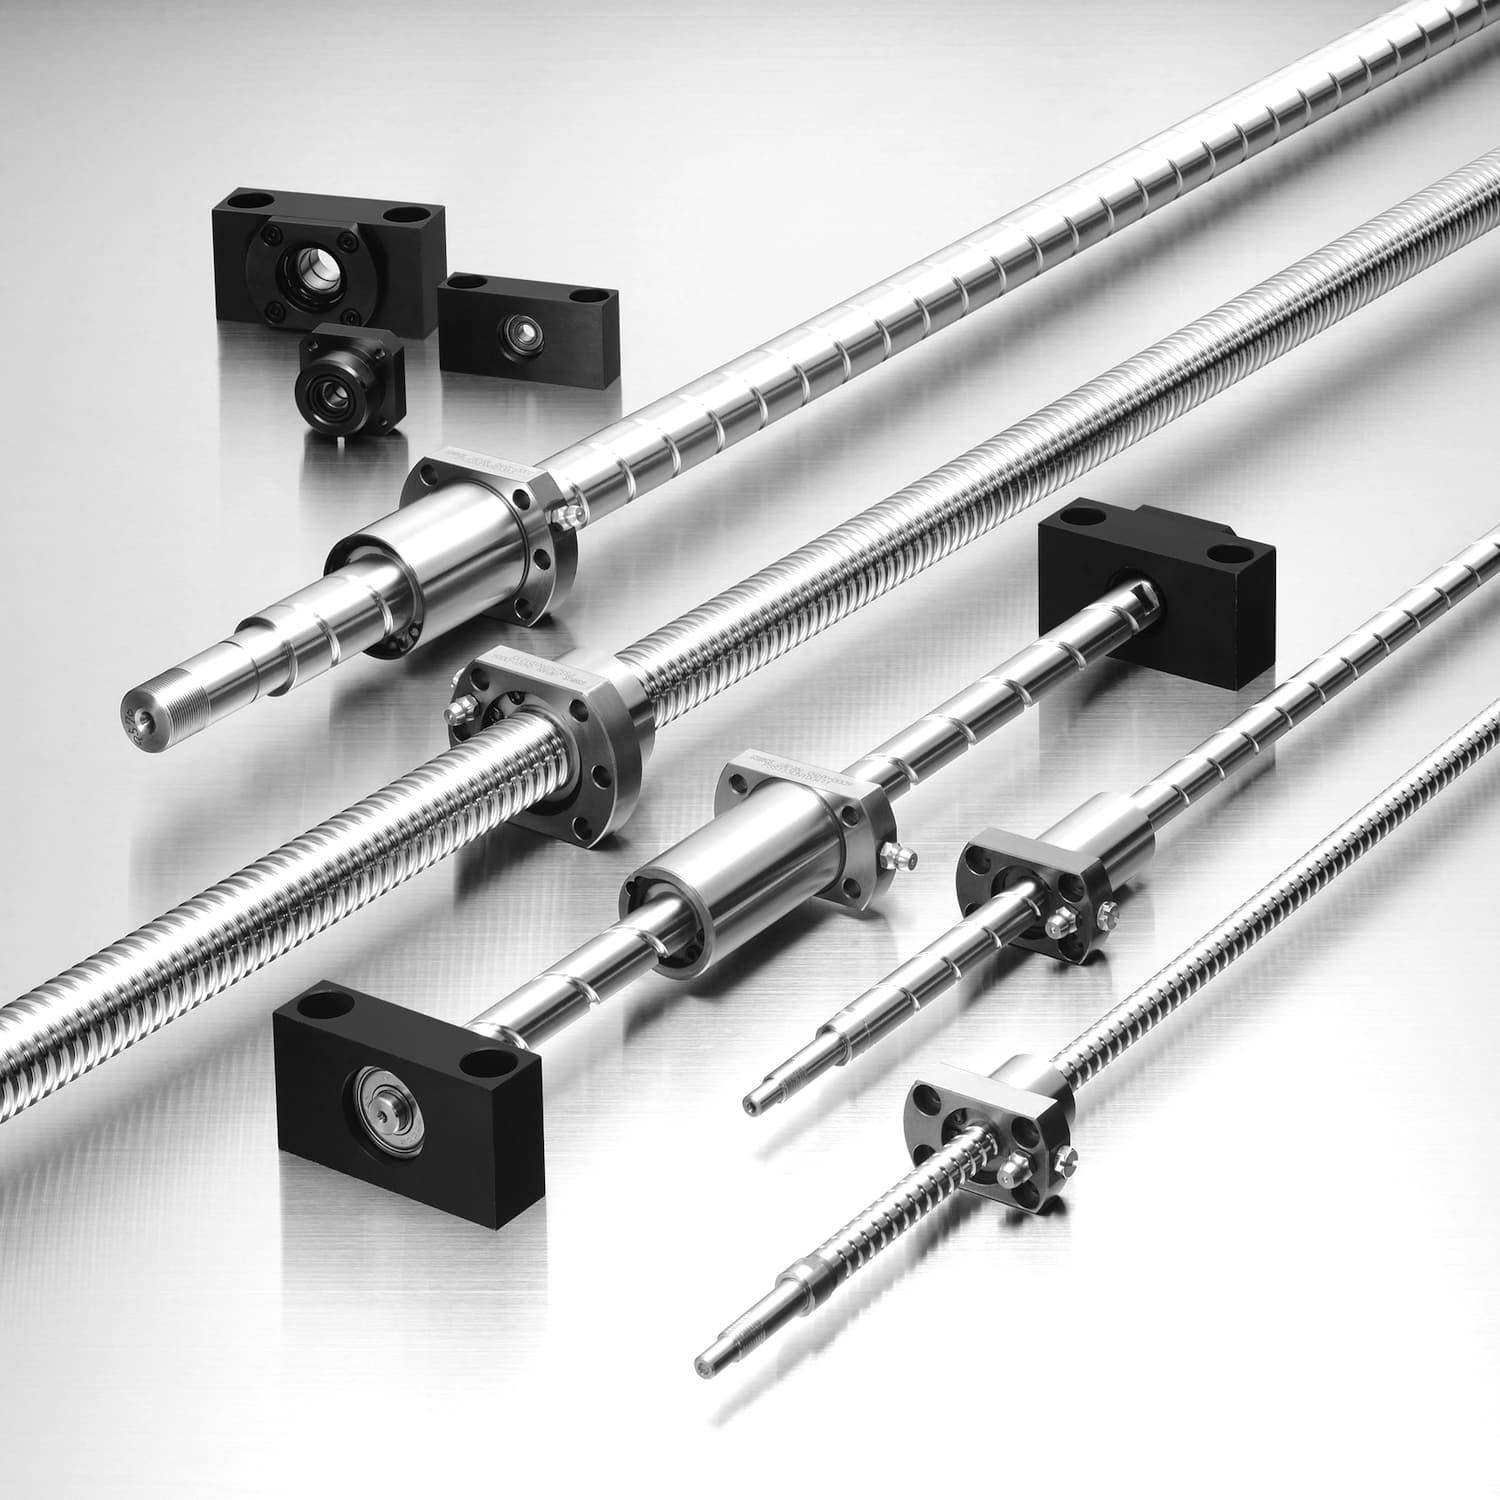 What Are The Cases And Advantages Of The Application Of High-Precision Ball Screws In The Field Of Medical Devices?